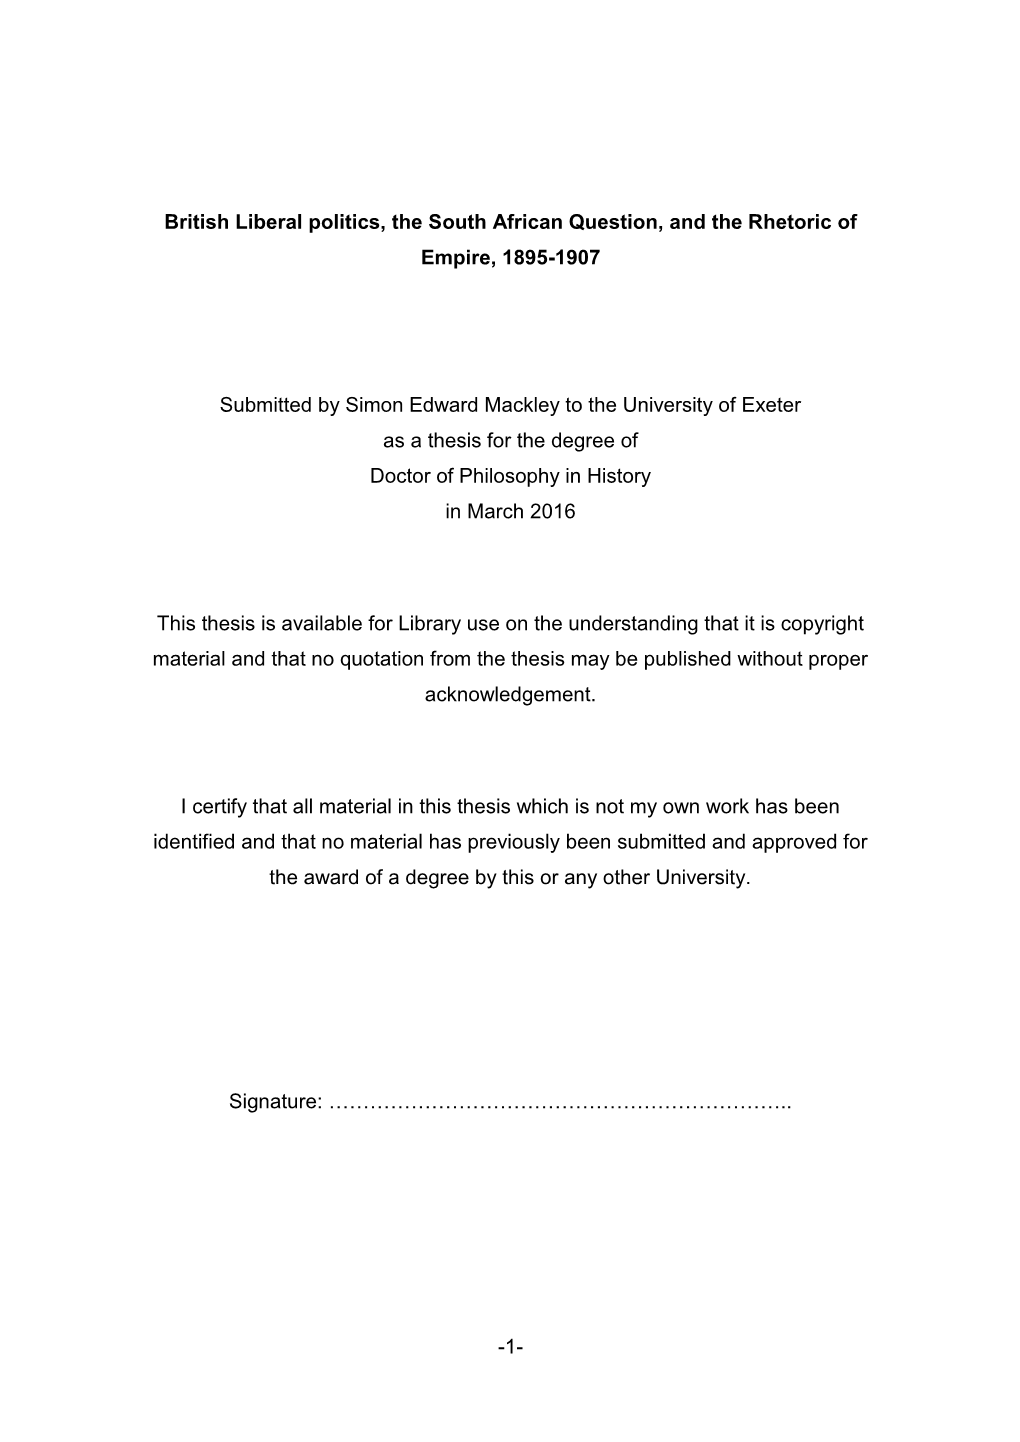 1- British Liberal Politics, the South African Question, and the Rhetoric of Empire, 1895-1907 Submitted by Simon Edward Mackle